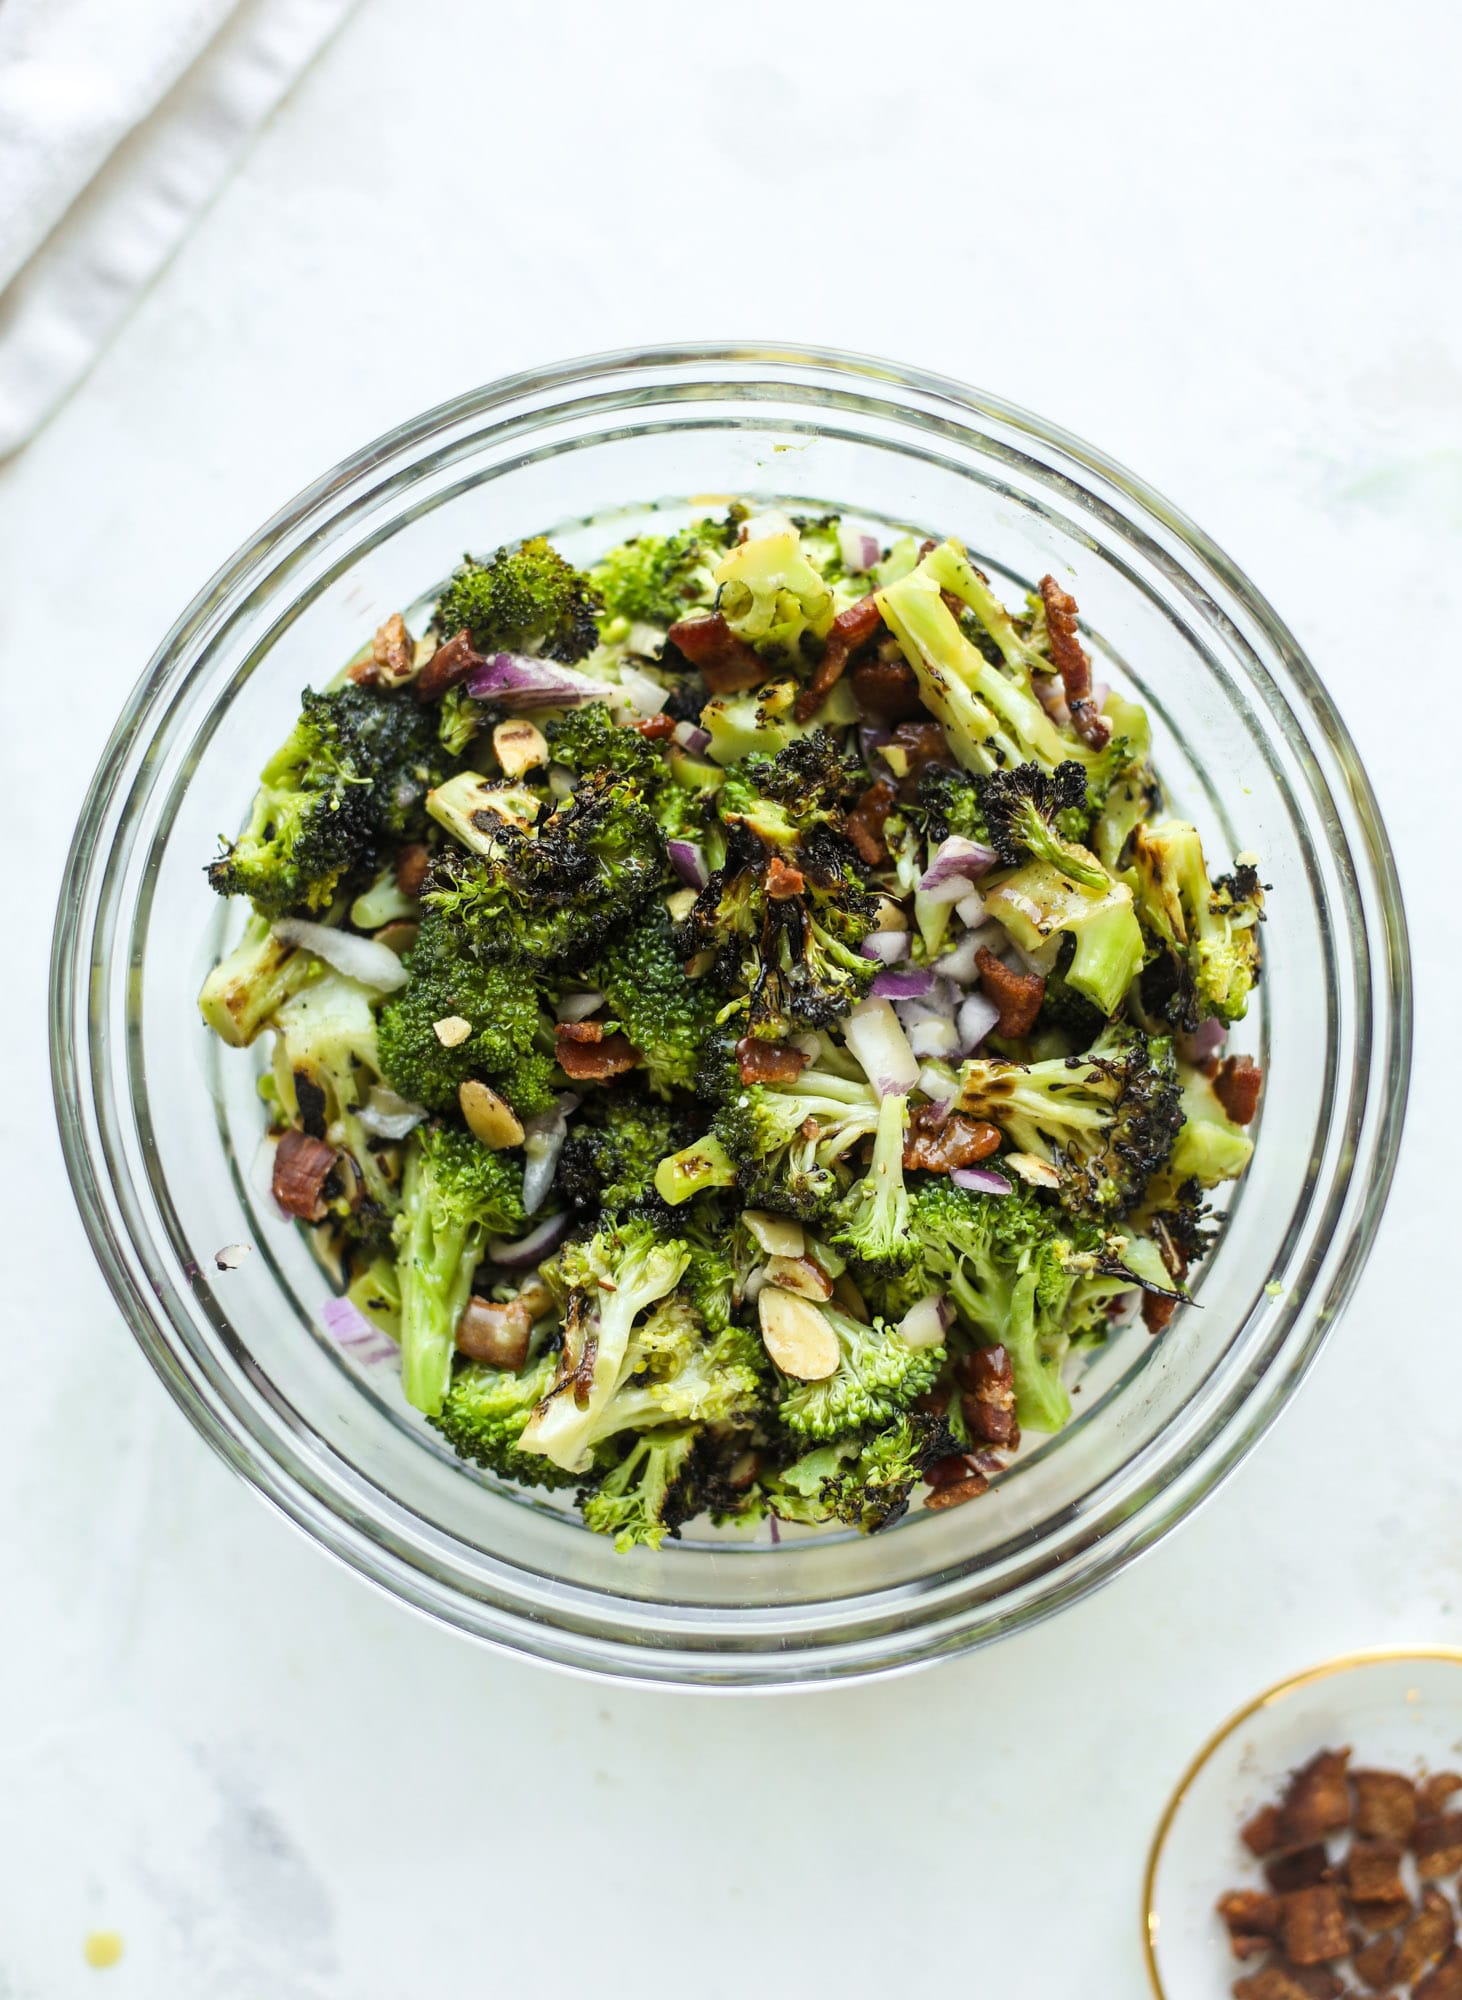 My favorite broccoli salad is here! This broccoli crunch salad is full of grilled broccoli, sliced almonds, diced scallions and crunchy bacon. It's so good!